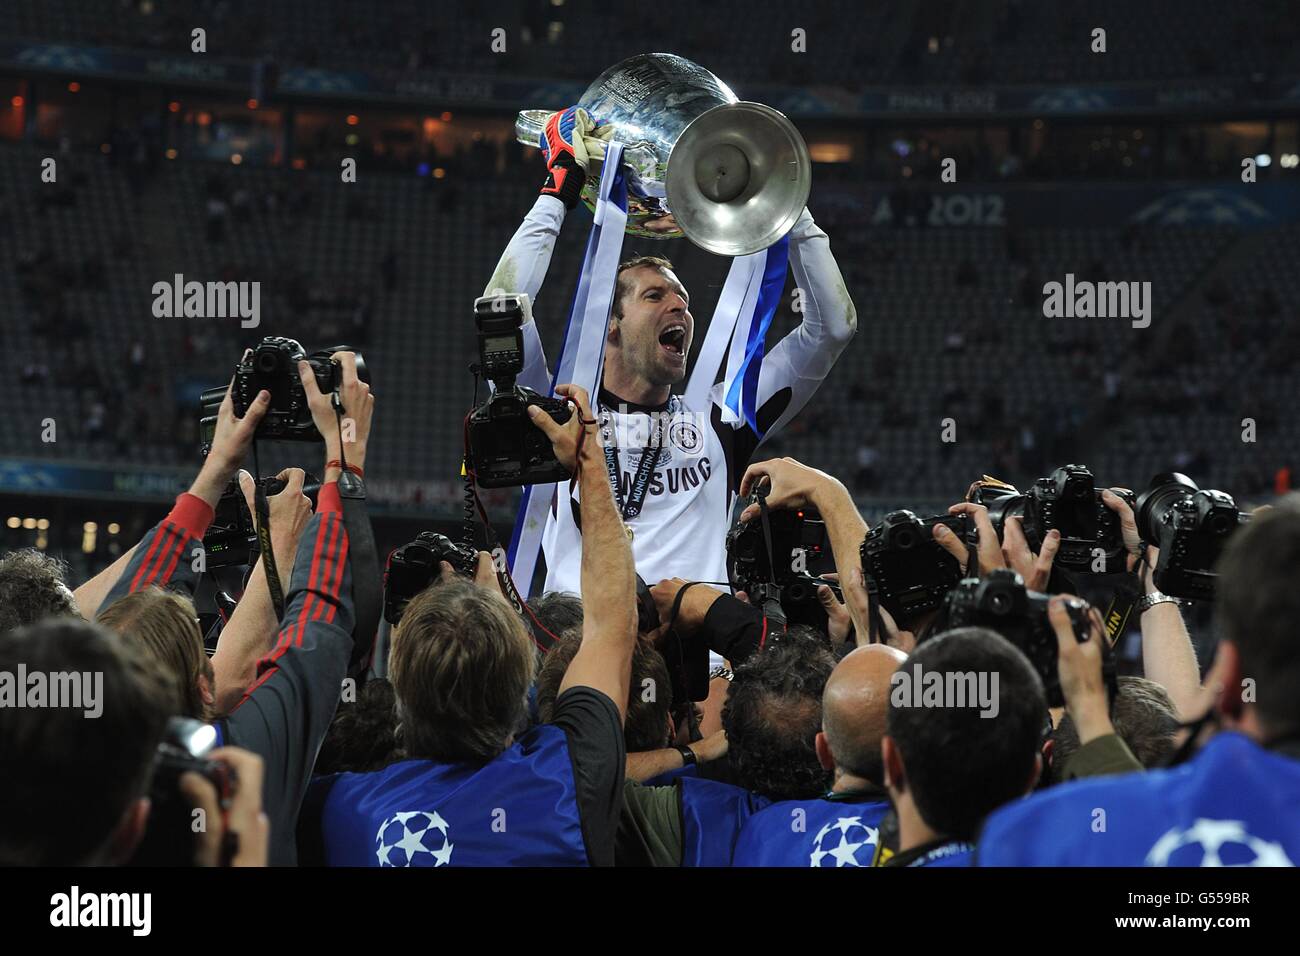 Soccer - UEFA Champions League - Final - Bayern Munich v Chelsea - Allianz Arena. Chelsea goalkeeper Petr Cech celebrates winning the UEFA Champions League, after the final whistle Stock Photo